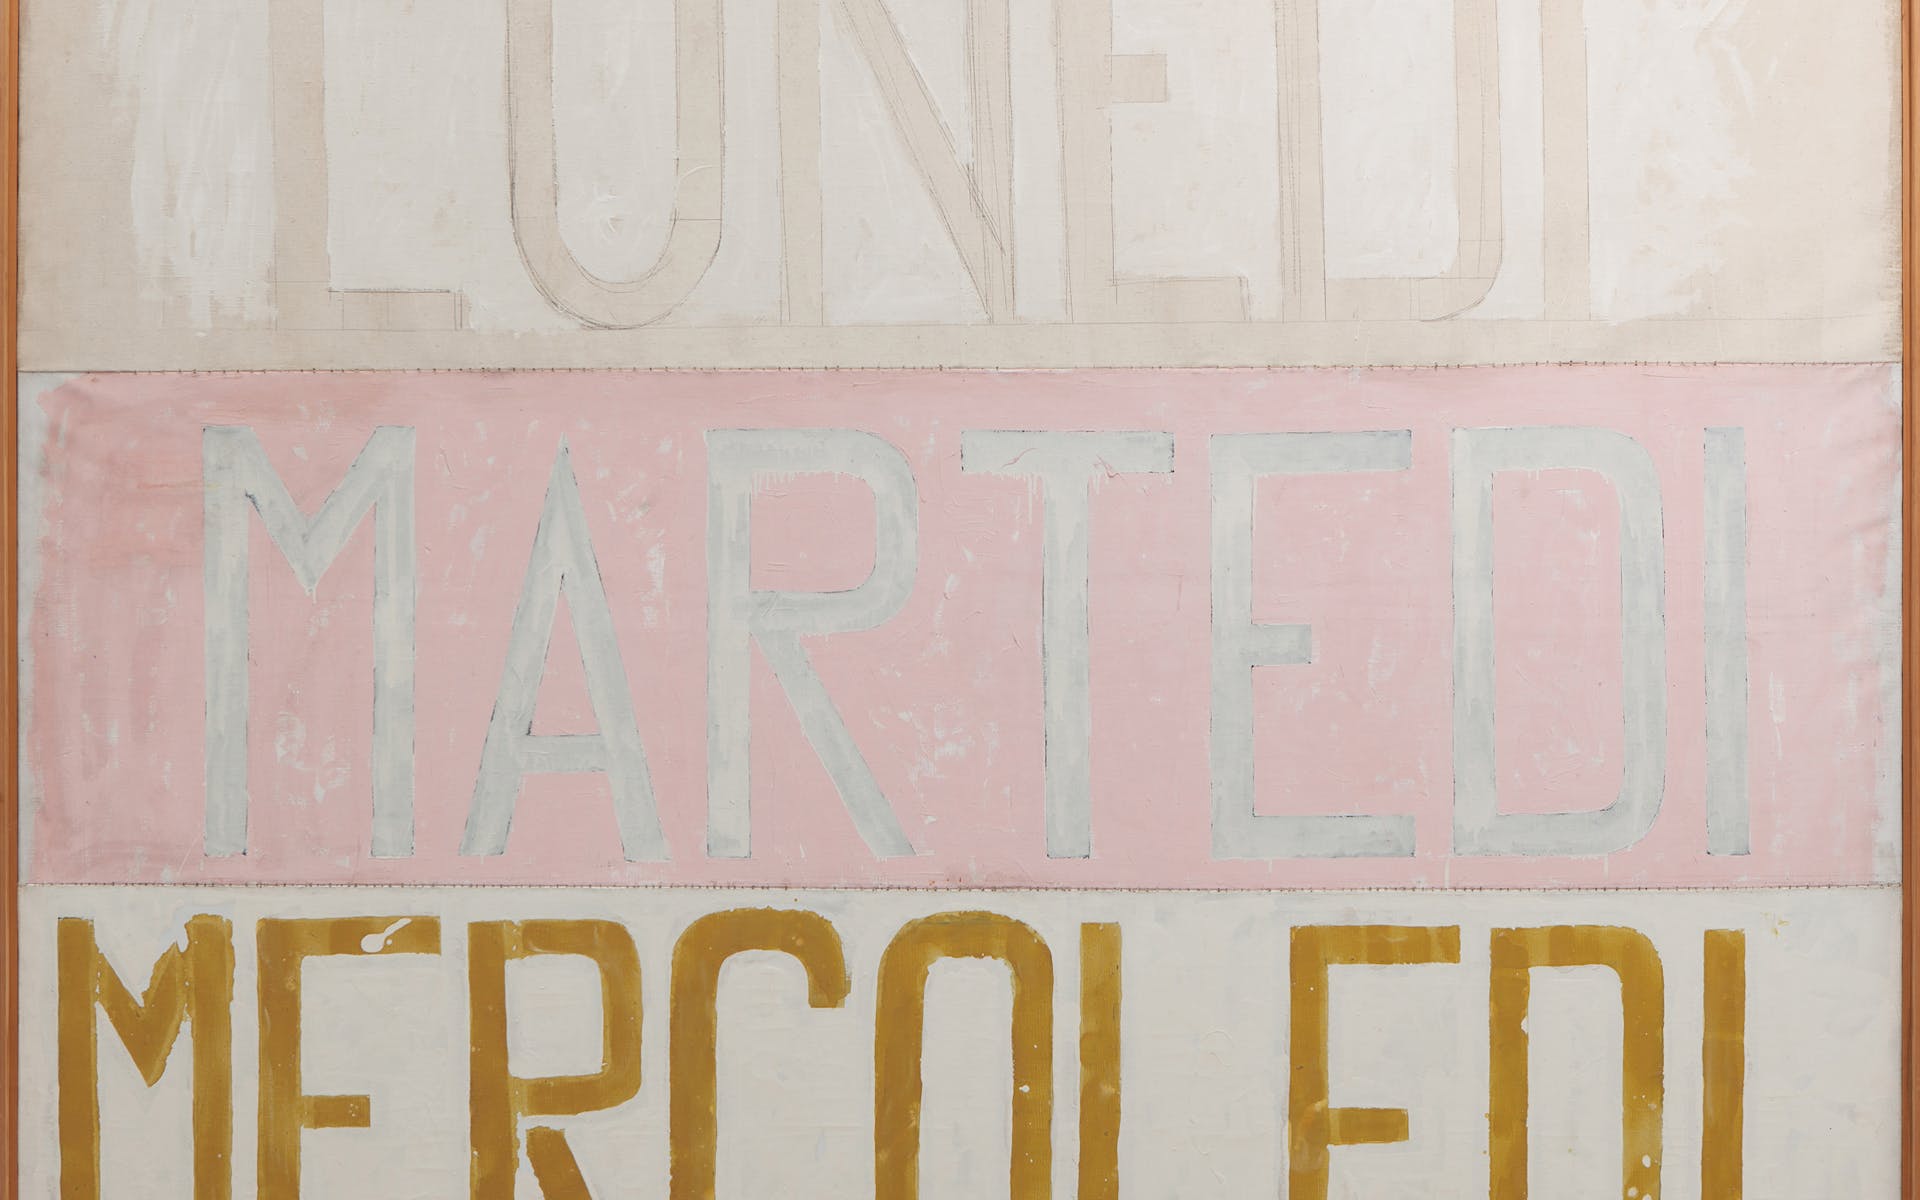 Painting in white, pink, and mustard depicting the words "Lunedì, Martedì, Mercoledì"